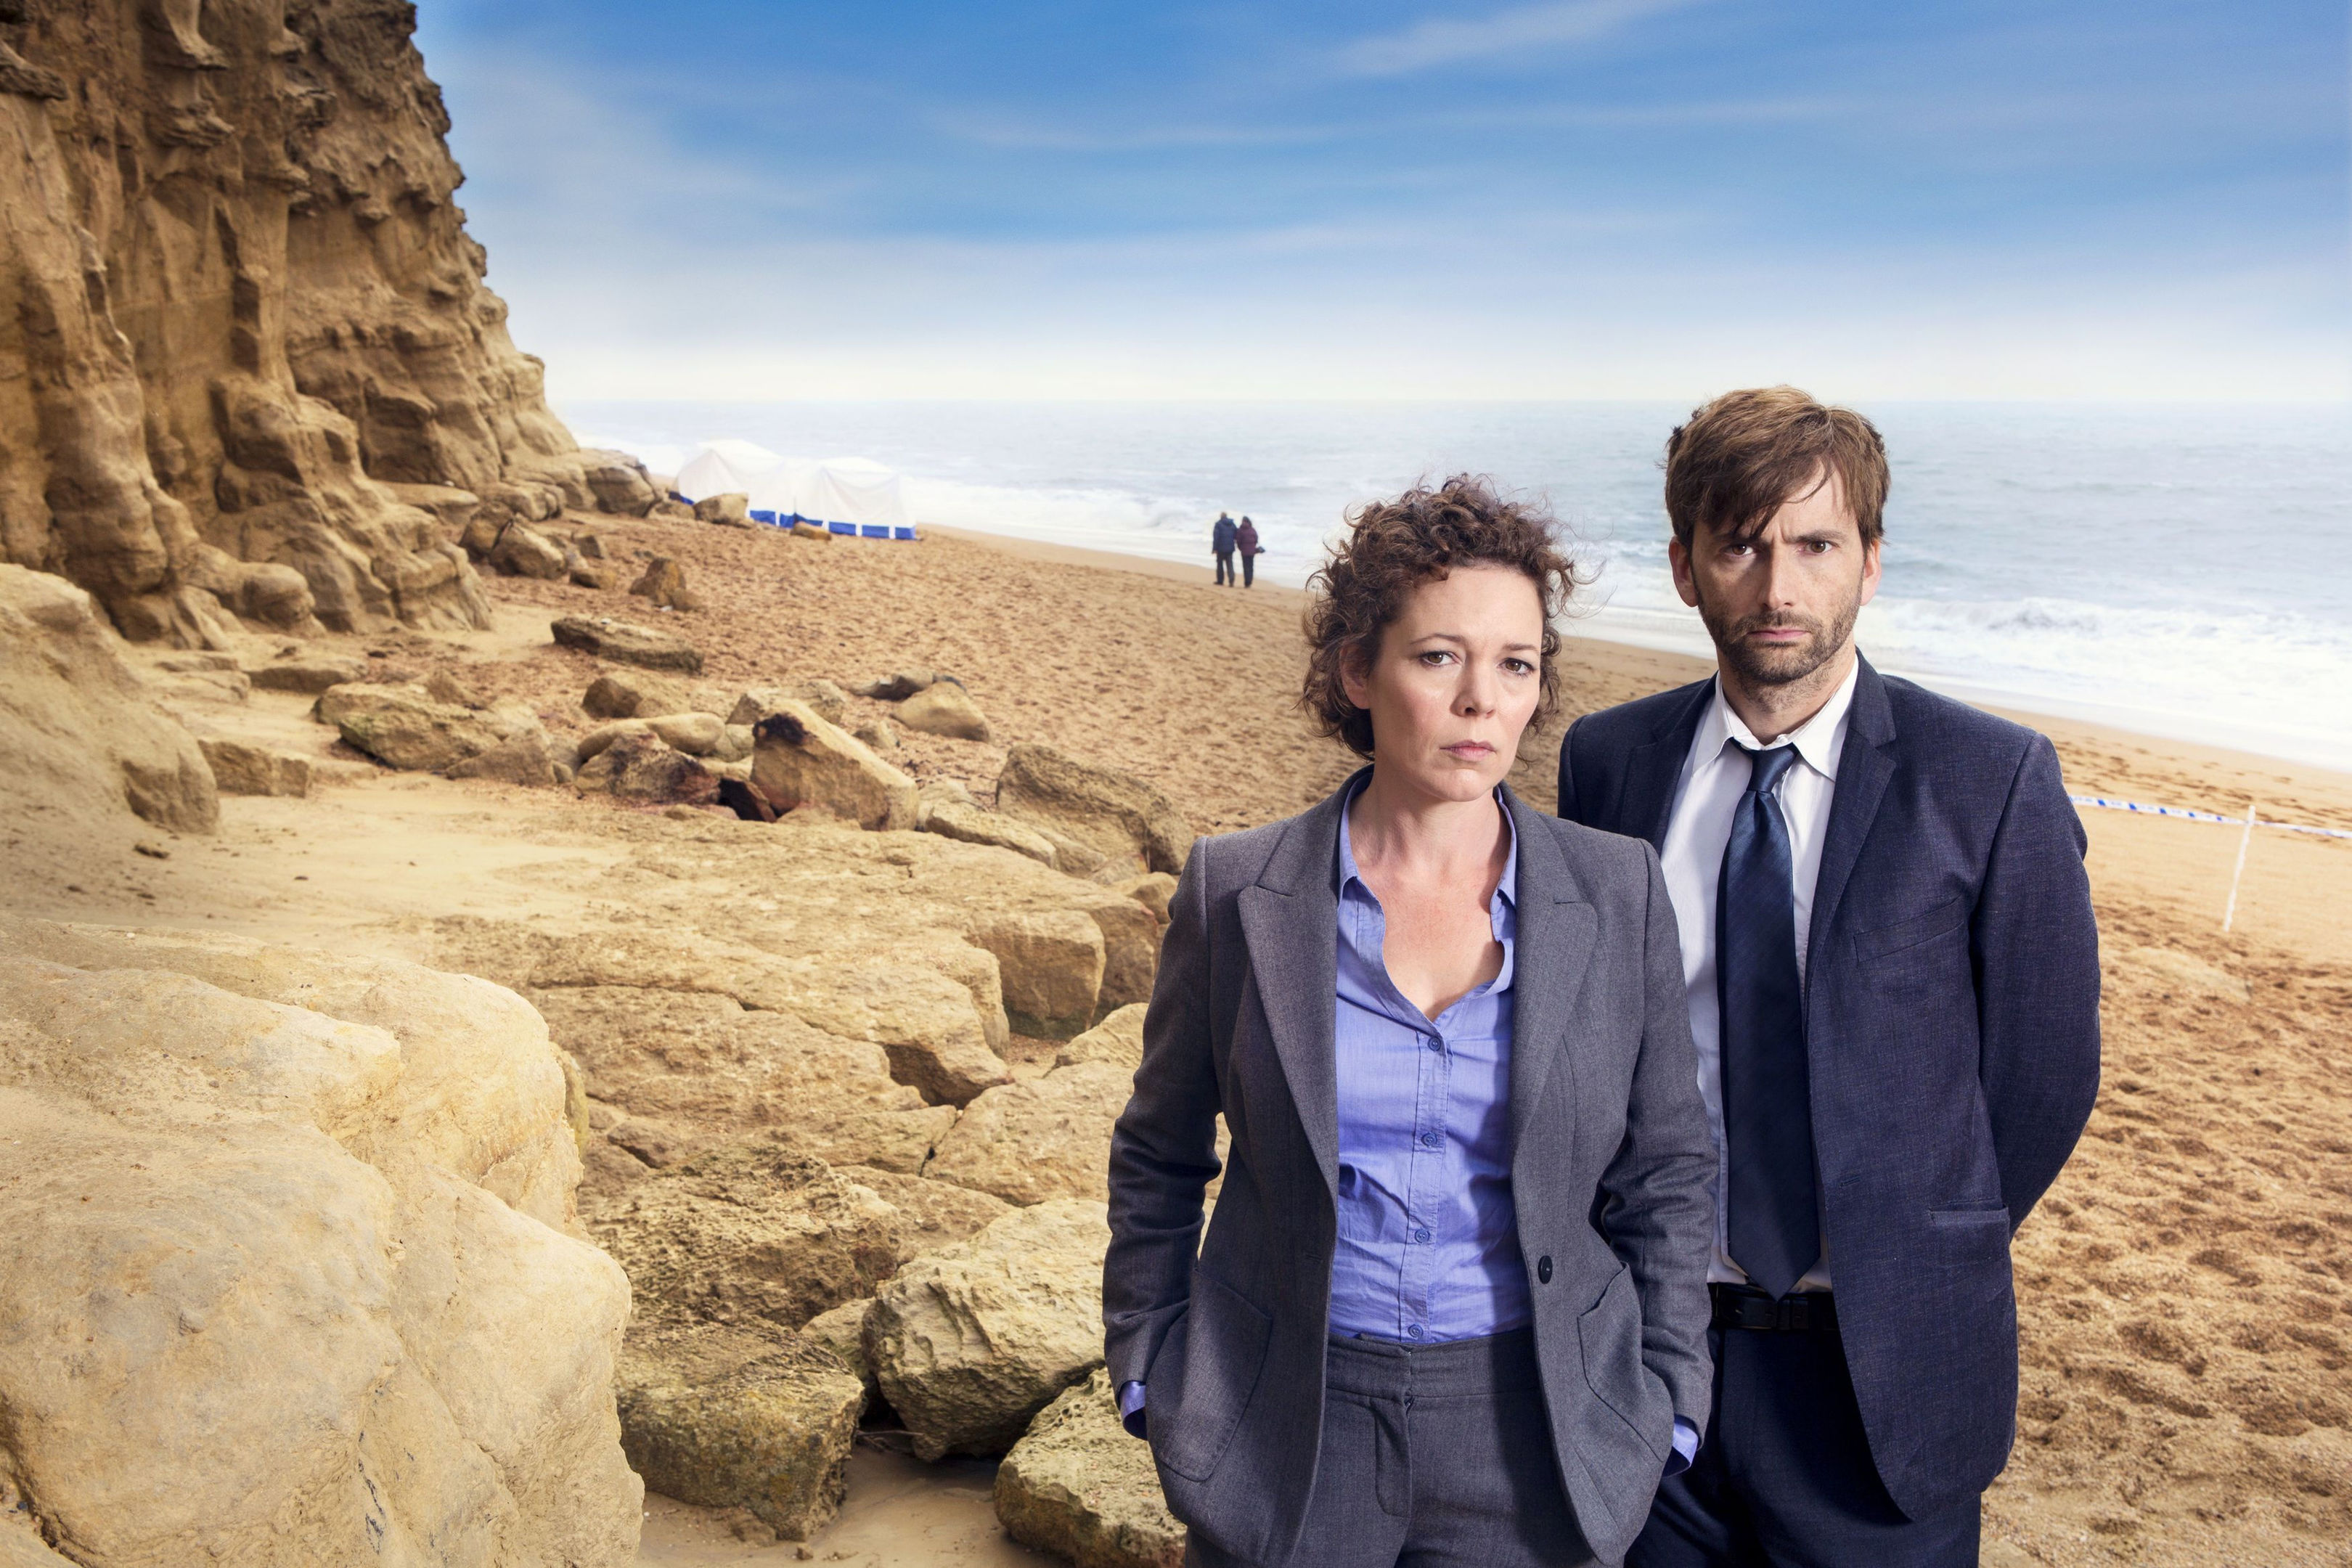 David Tennant and Olivia Colman in their roles as Detective Inspector Alec Hardy and Detective Sergeant Ellie Miller in Broadchurch (Patrick Redmond/ITV/PA Wire)